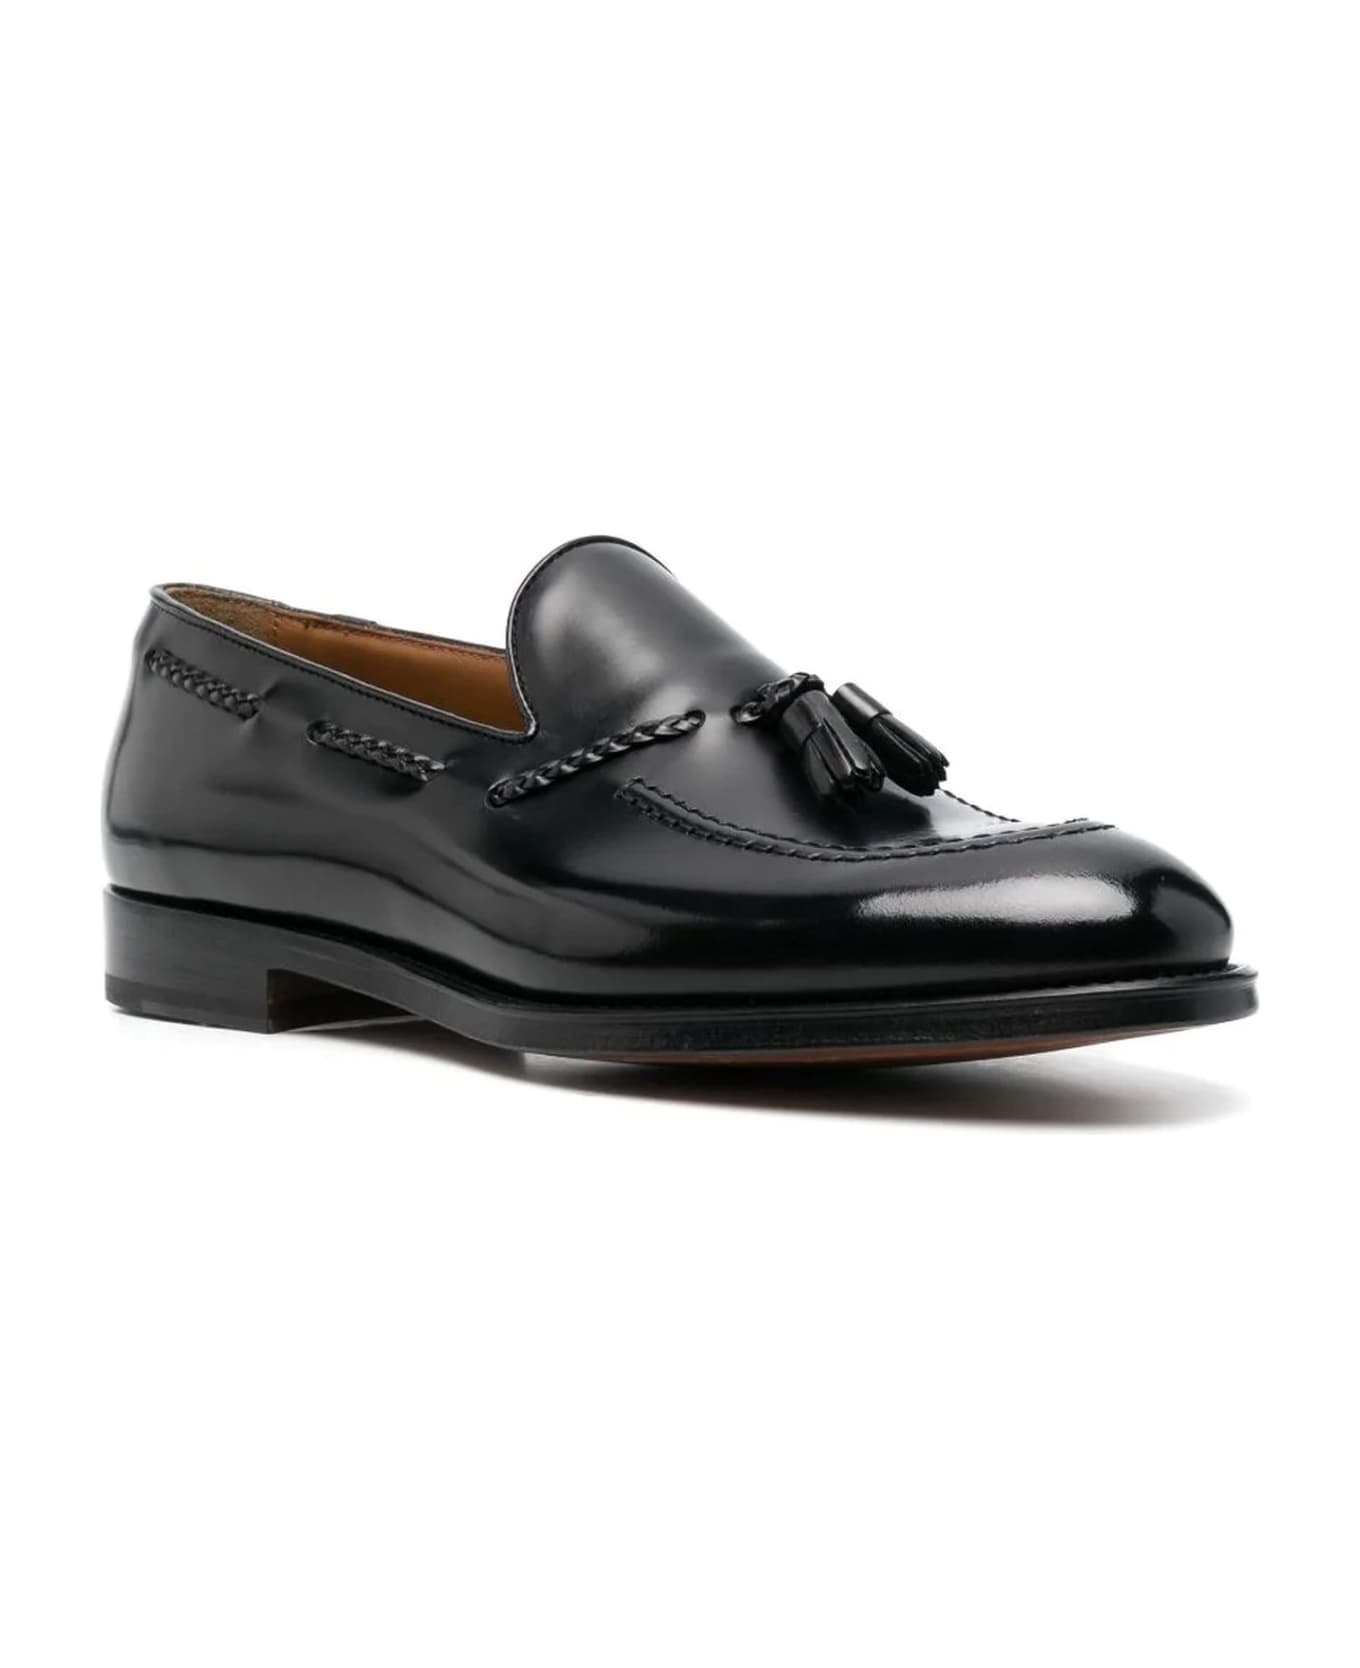 Doucal's Black Calf Leather Loafers - Black ローファー＆デッキシューズ